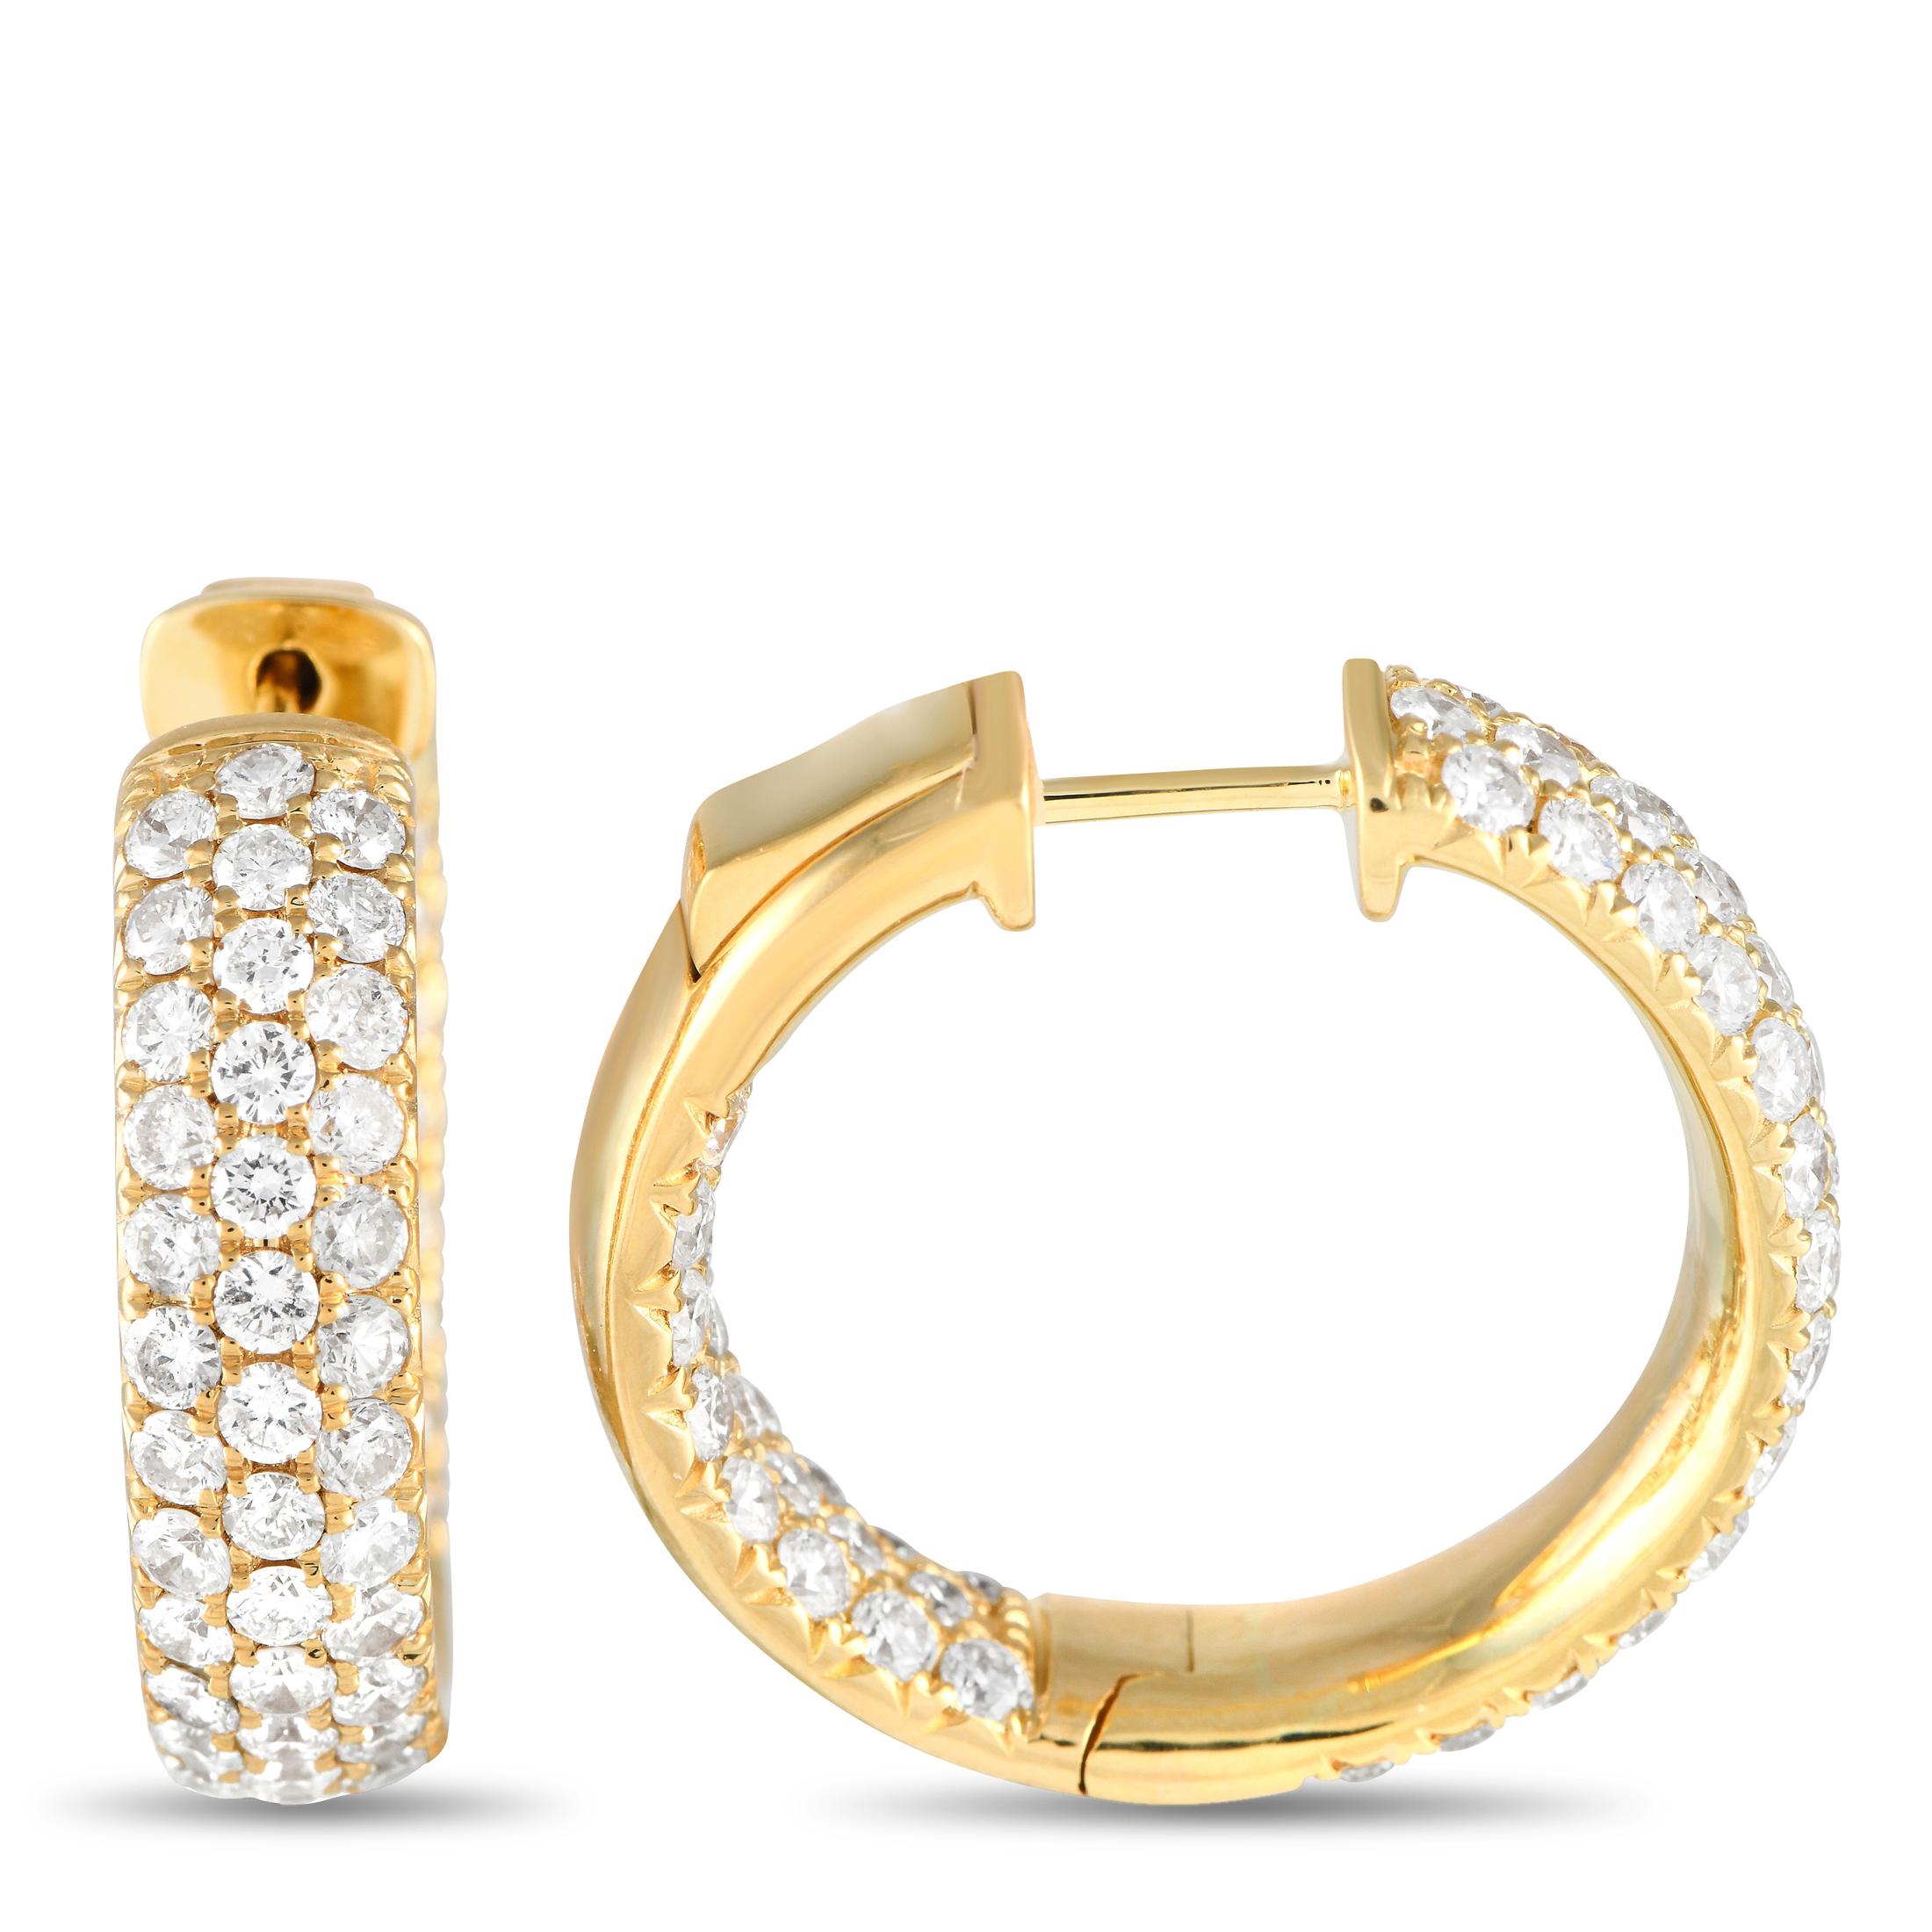 Count on these statement-making hoops to bring a dash of glam to your looks. Each yellow gold hoop measures 1